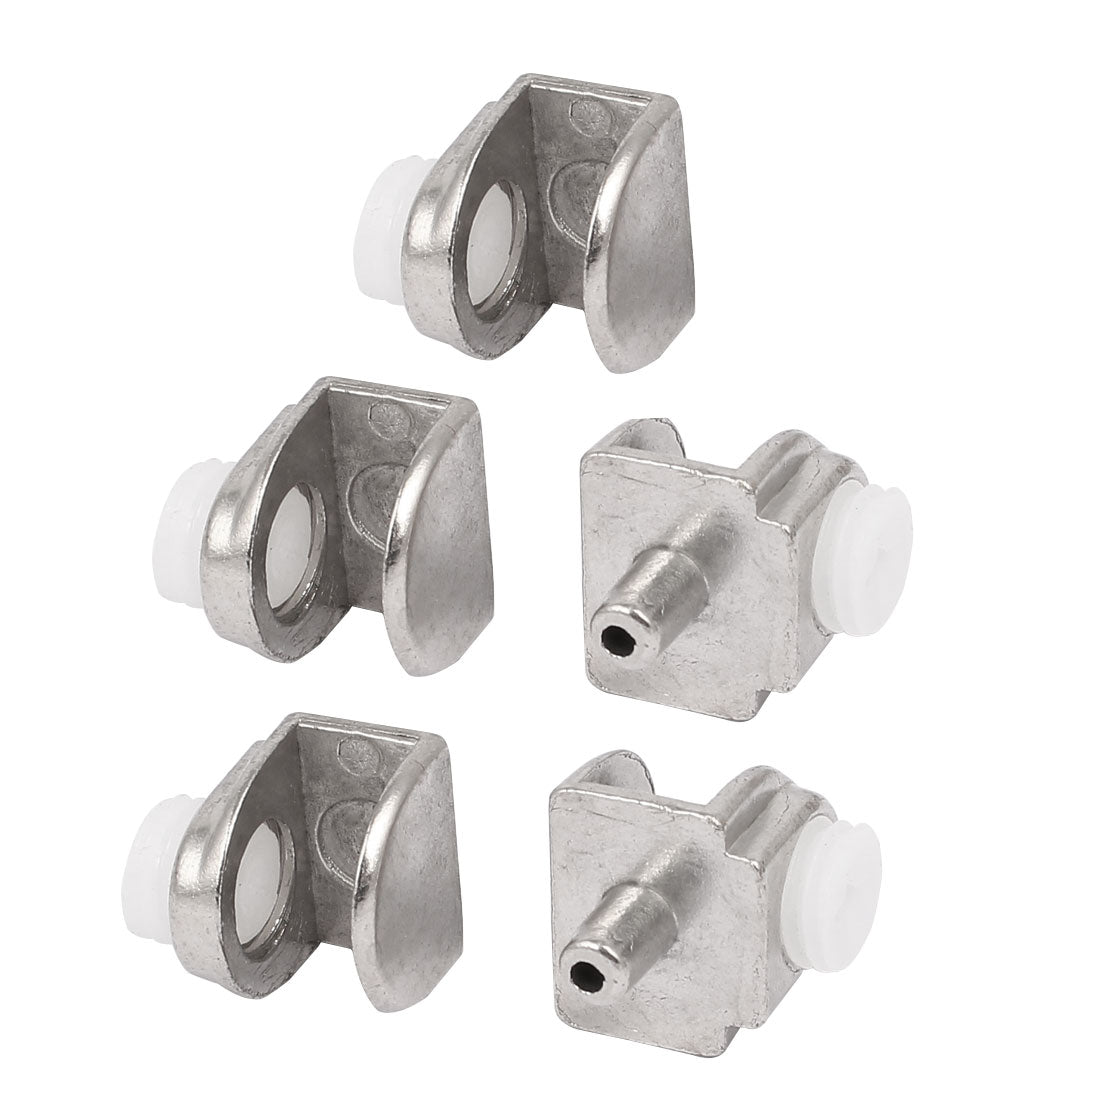 uxcell Uxcell Zinc Alloy Shelf Support Bracket Adjustable Clamp Clips 5pcs for 5-8mm Thick Glass